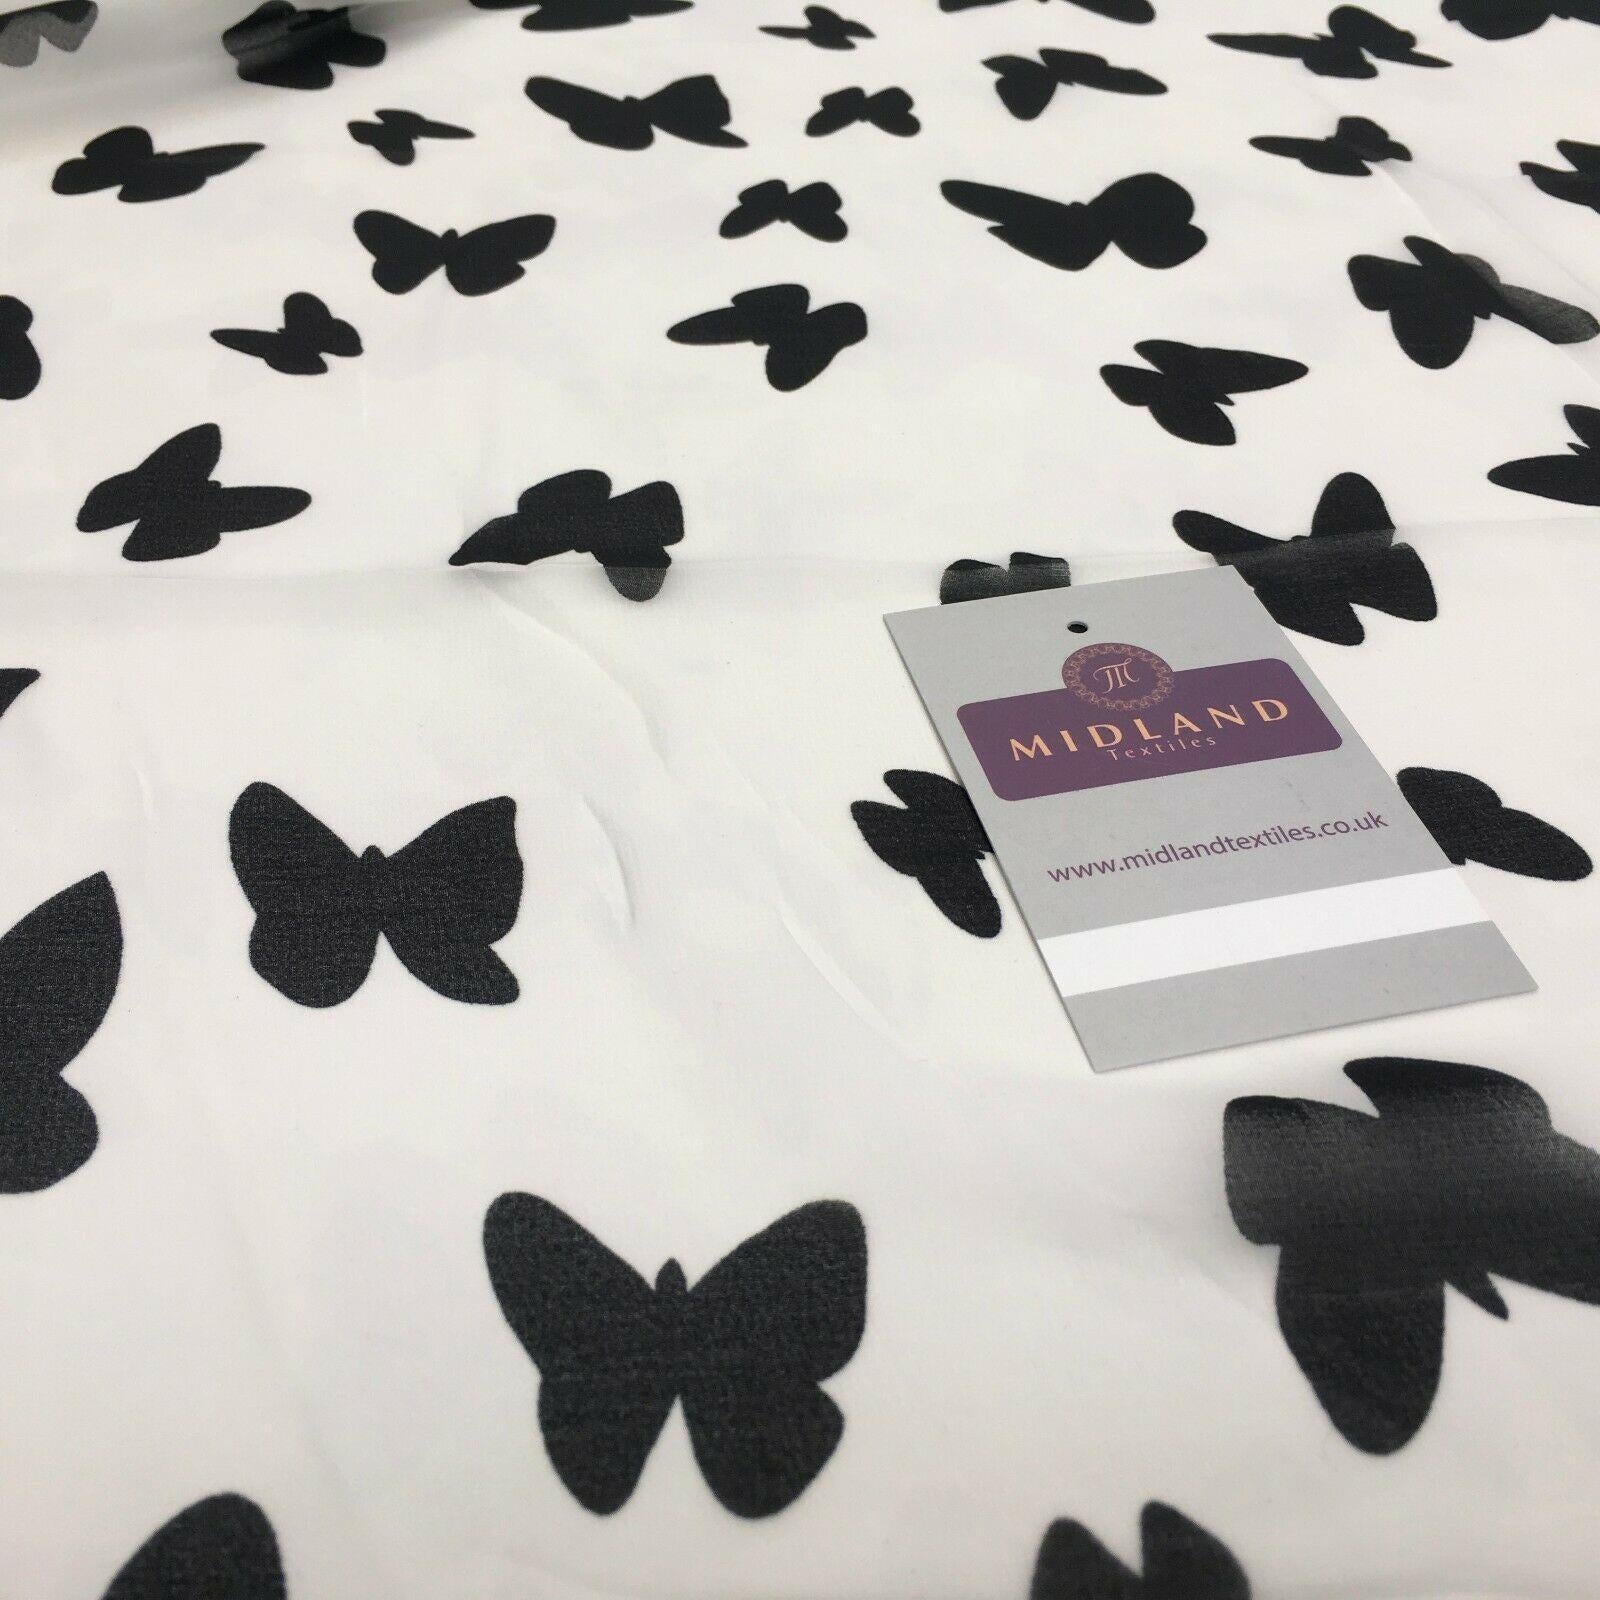 Black Ivory Butterfly Silhouette Printed Chiffon Fabric 150 cm Wide MK1084-5